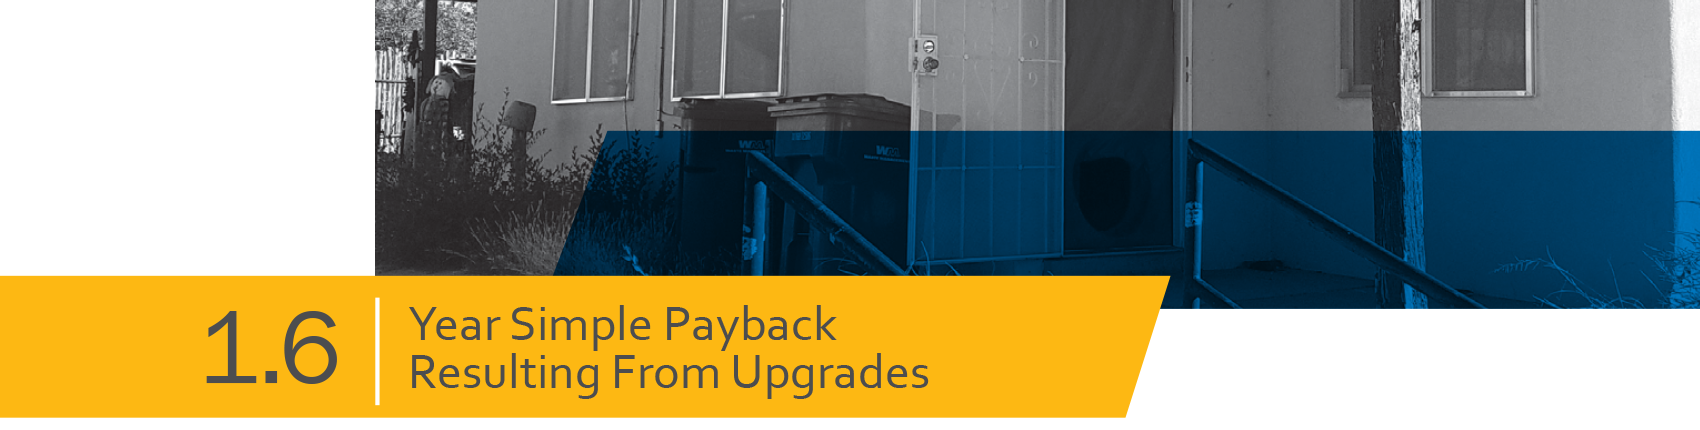 1.6 Year Simple Payback Resulting From Upgrades